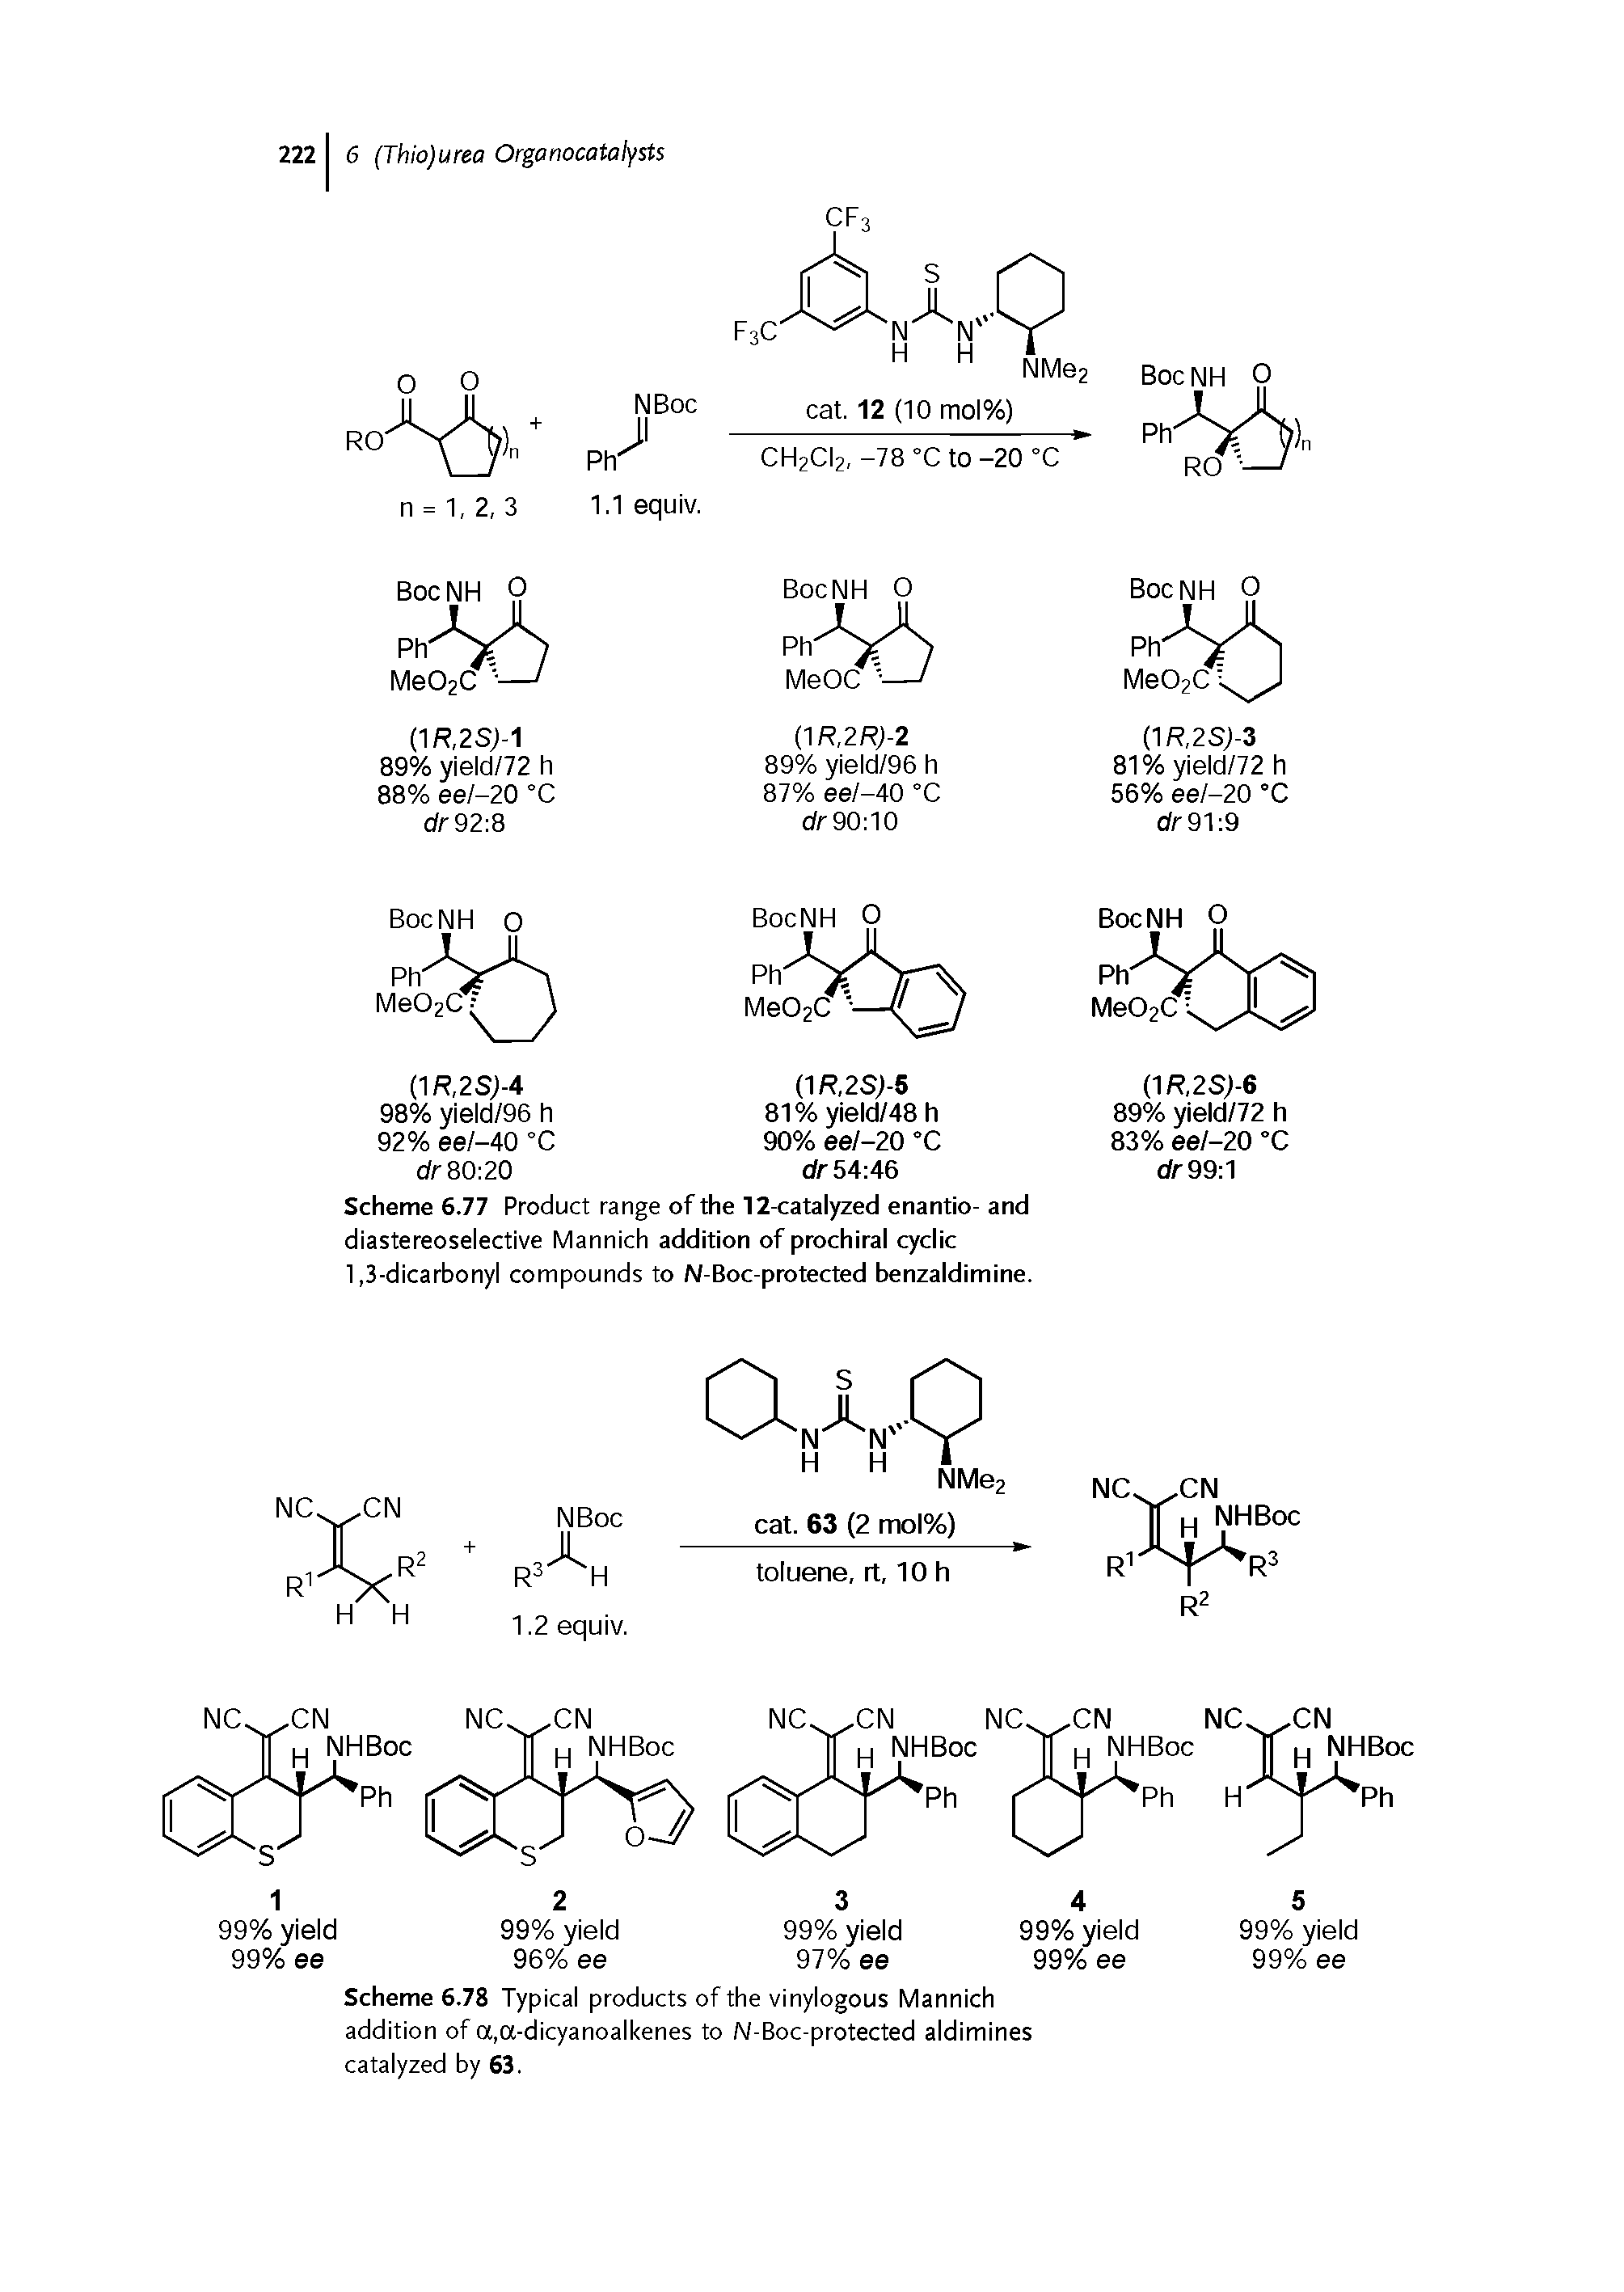 Scheme 6.77 Product range of the 12-catalyzed enantio- and diastereoselective Mannich addition of prochiral cyclic 1,3-dicarbonyl compounds to N-Boc-protected benzaldimine.